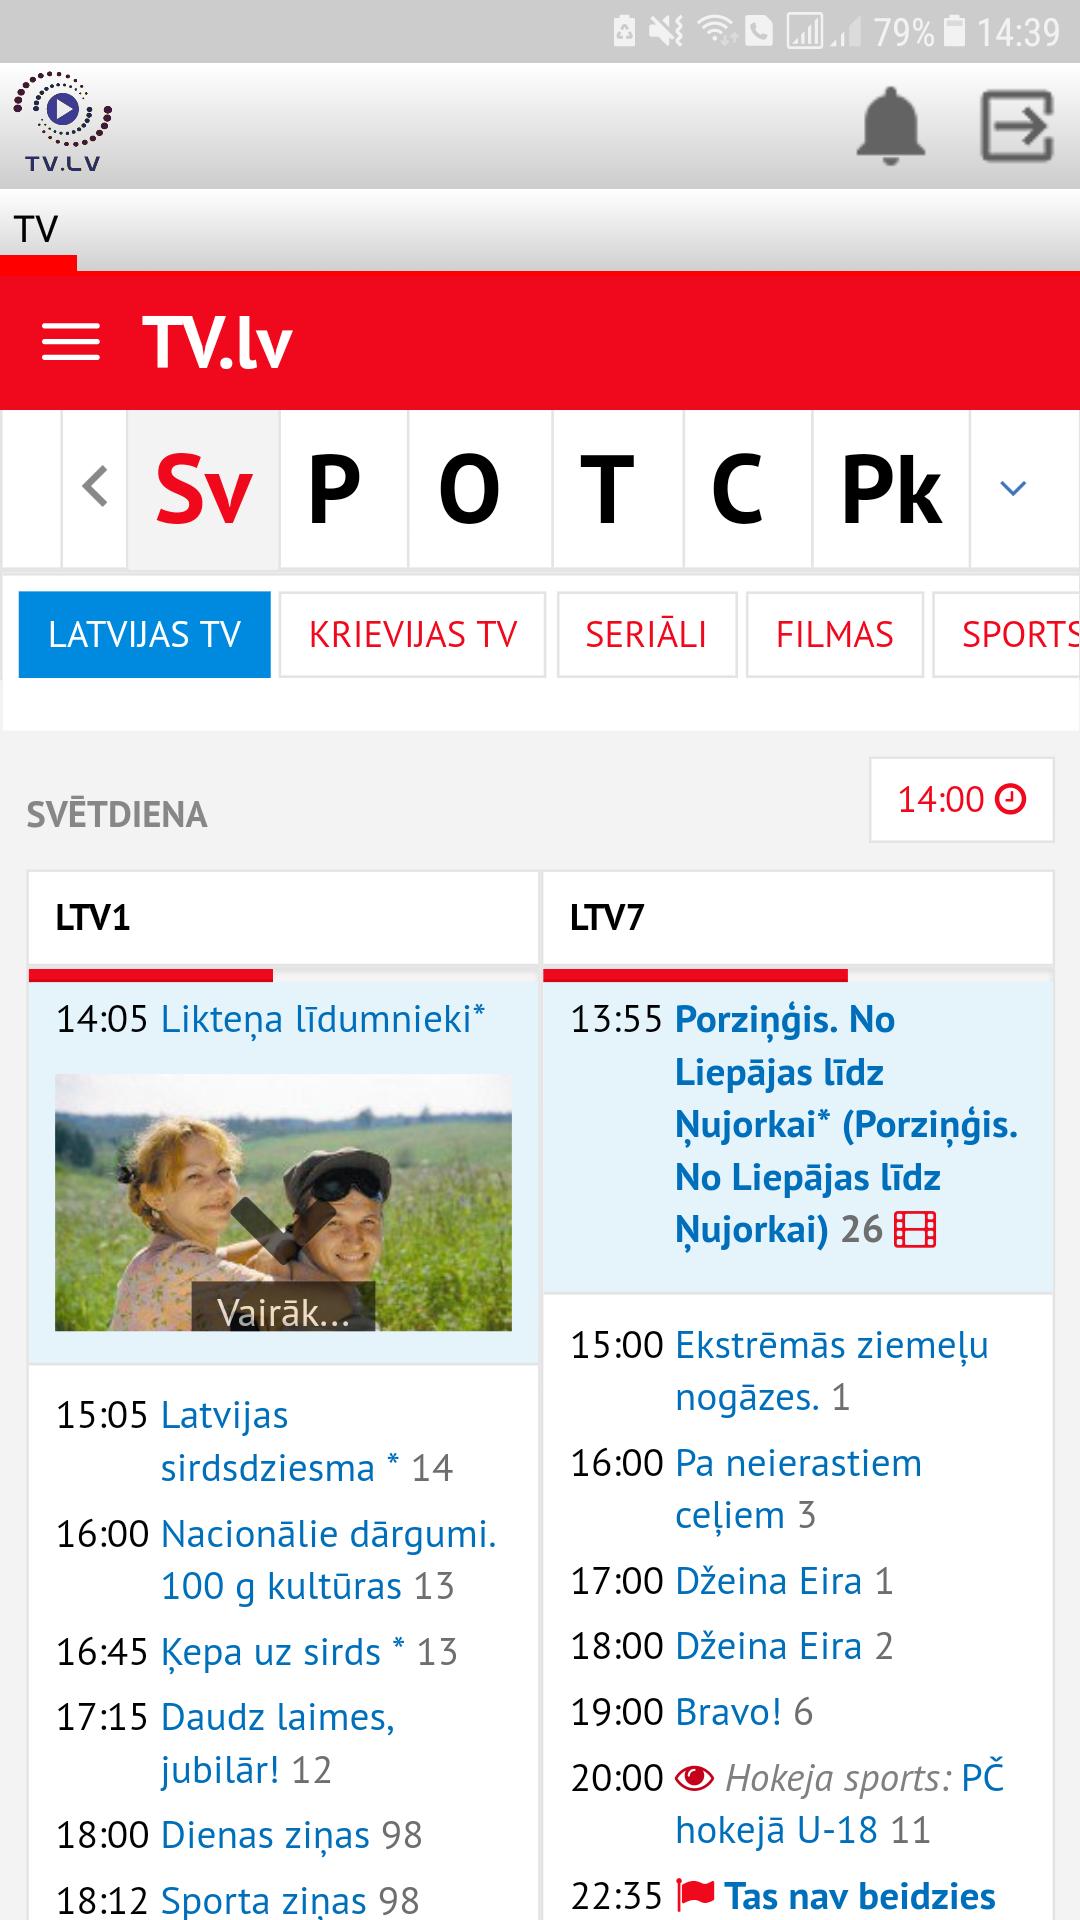 TV.LV for Android - APK Download